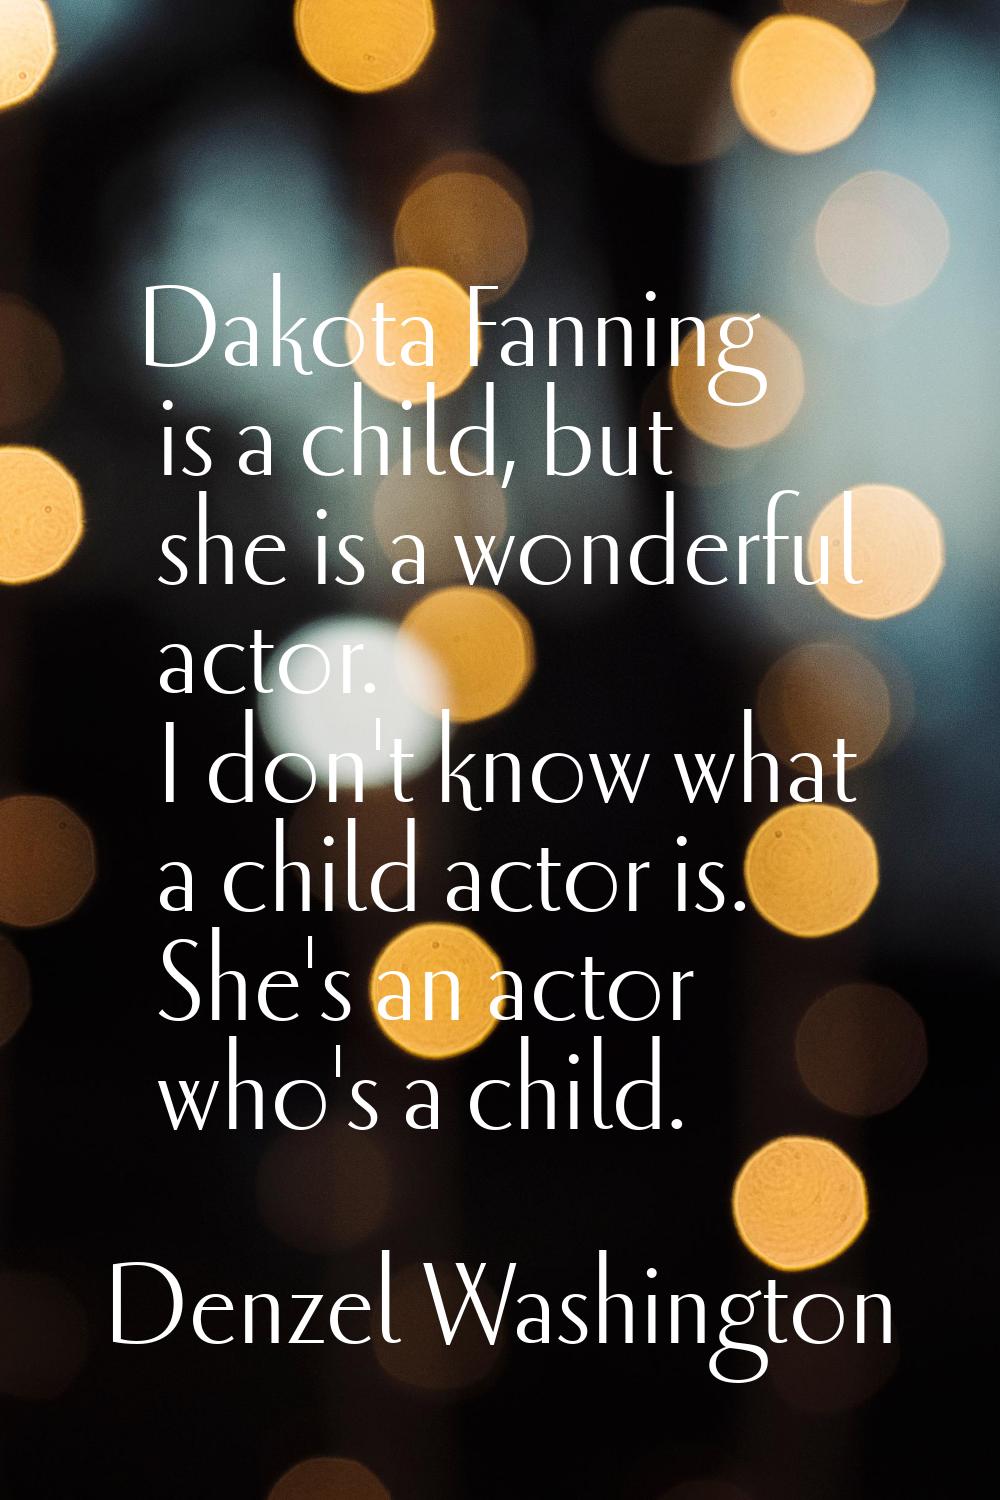 Dakota Fanning is a child, but she is a wonderful actor. I don't know what a child actor is. She's 